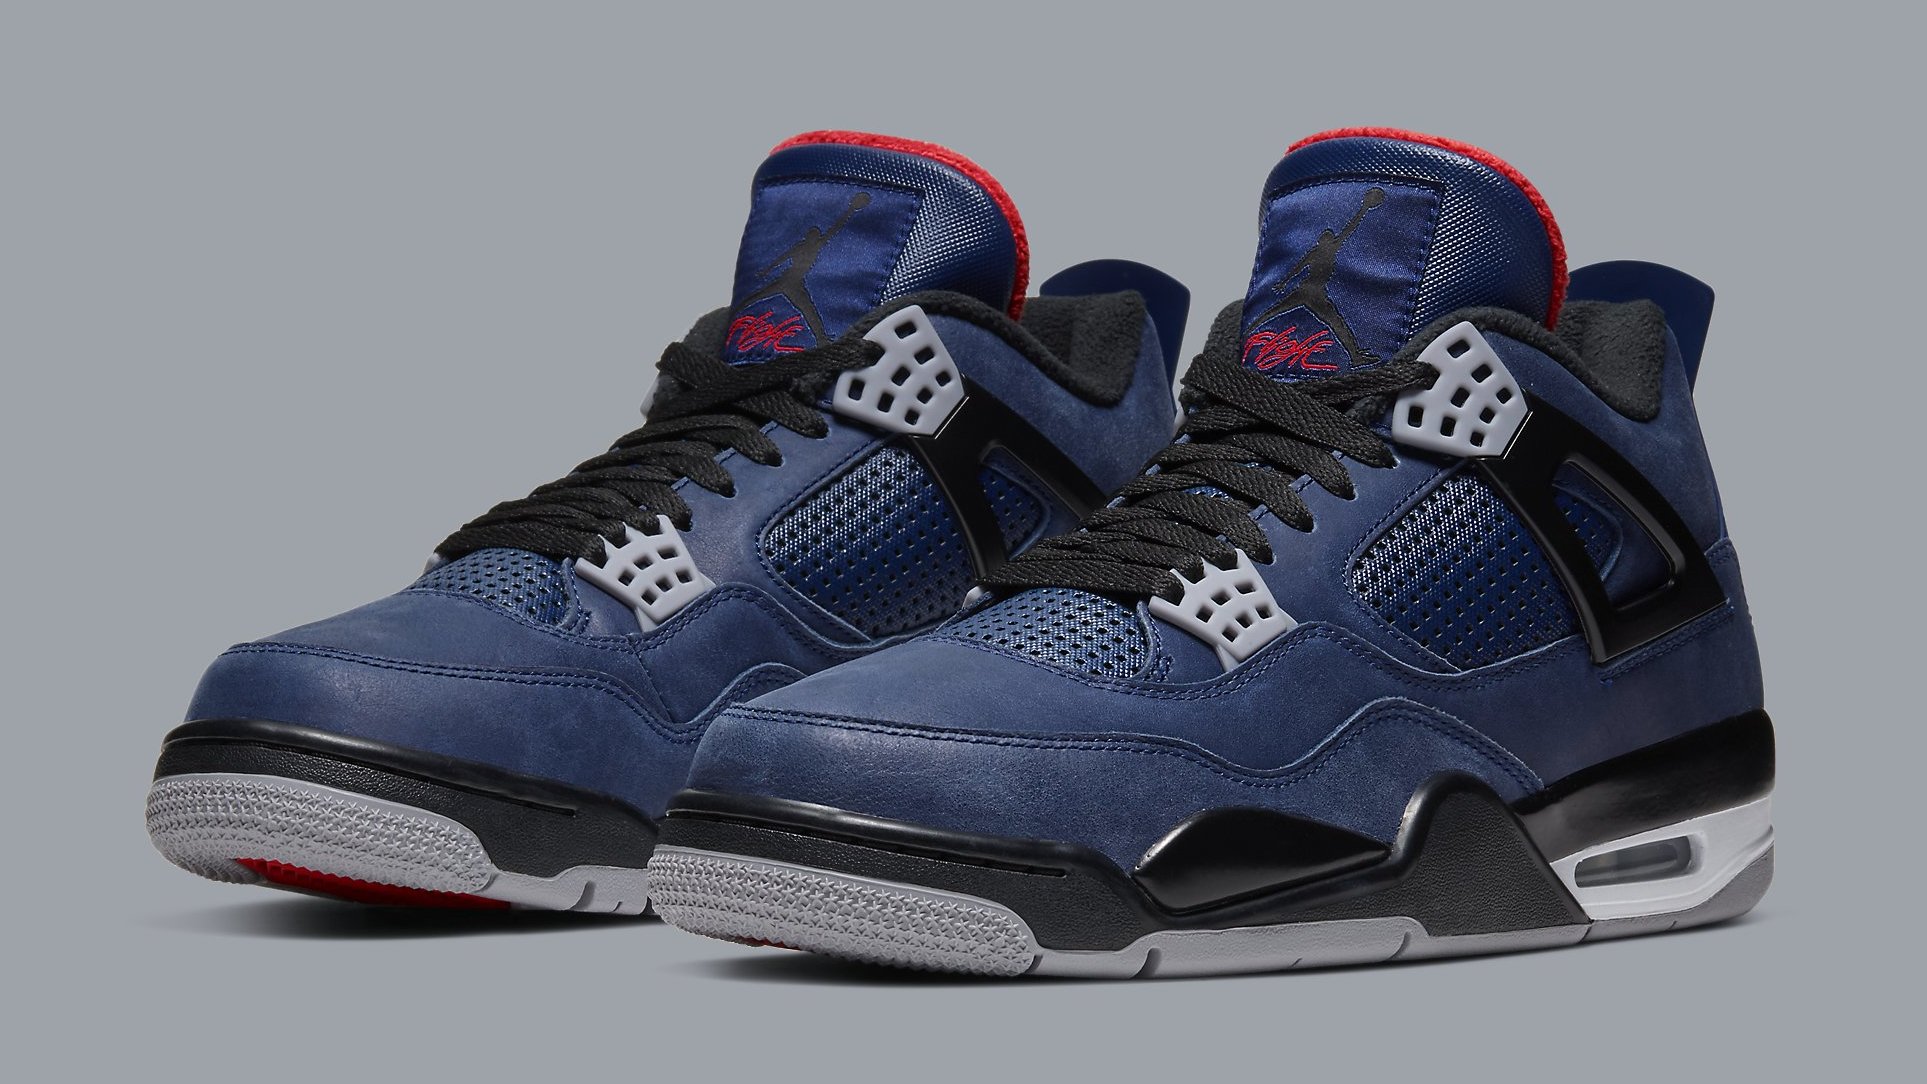 Best Look Yet at the Air Jordan 4 WNTR 'Loyal Blue' | Complex